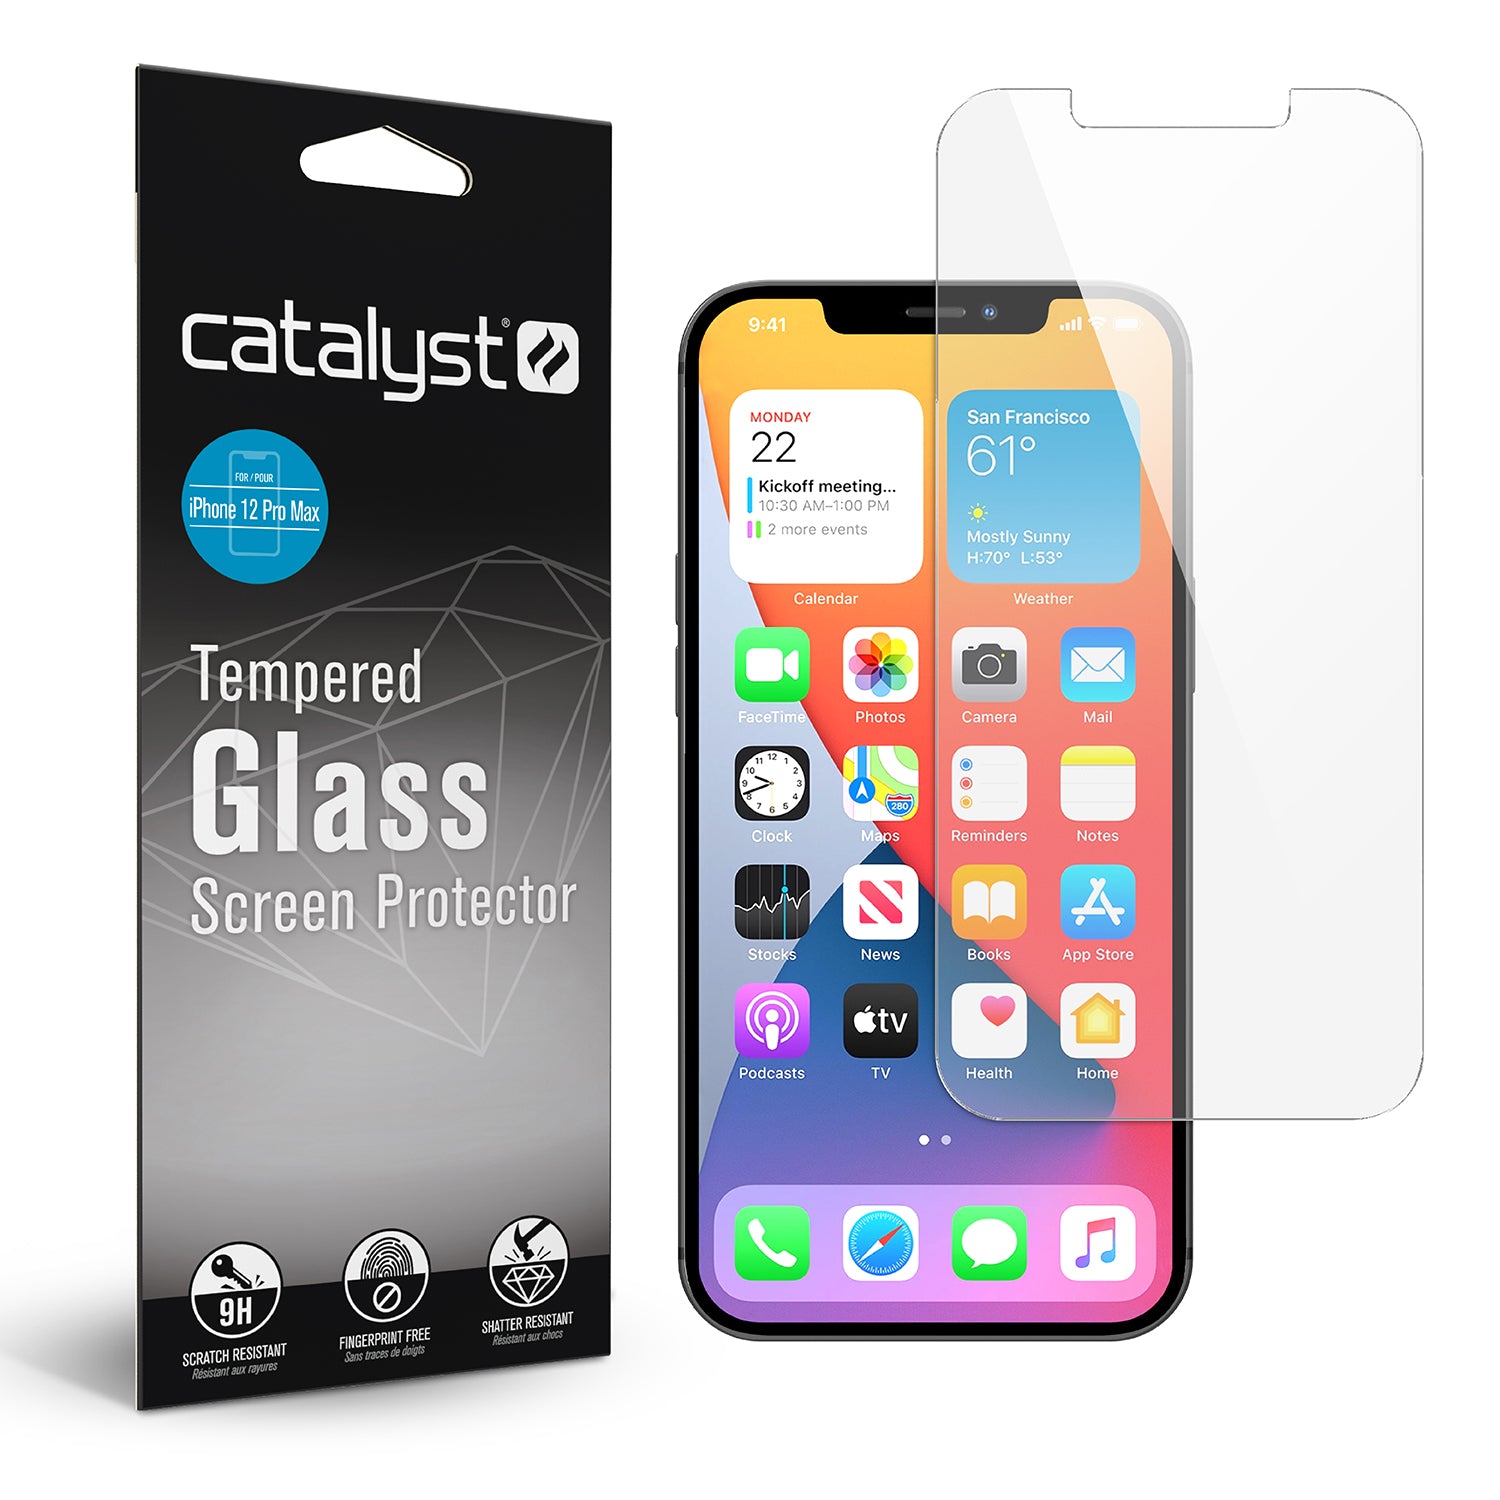 Catalyst Tempered Glass Screen Protector for iphone 12 pro max with packaging and tempered glass screen protector and iPhone.